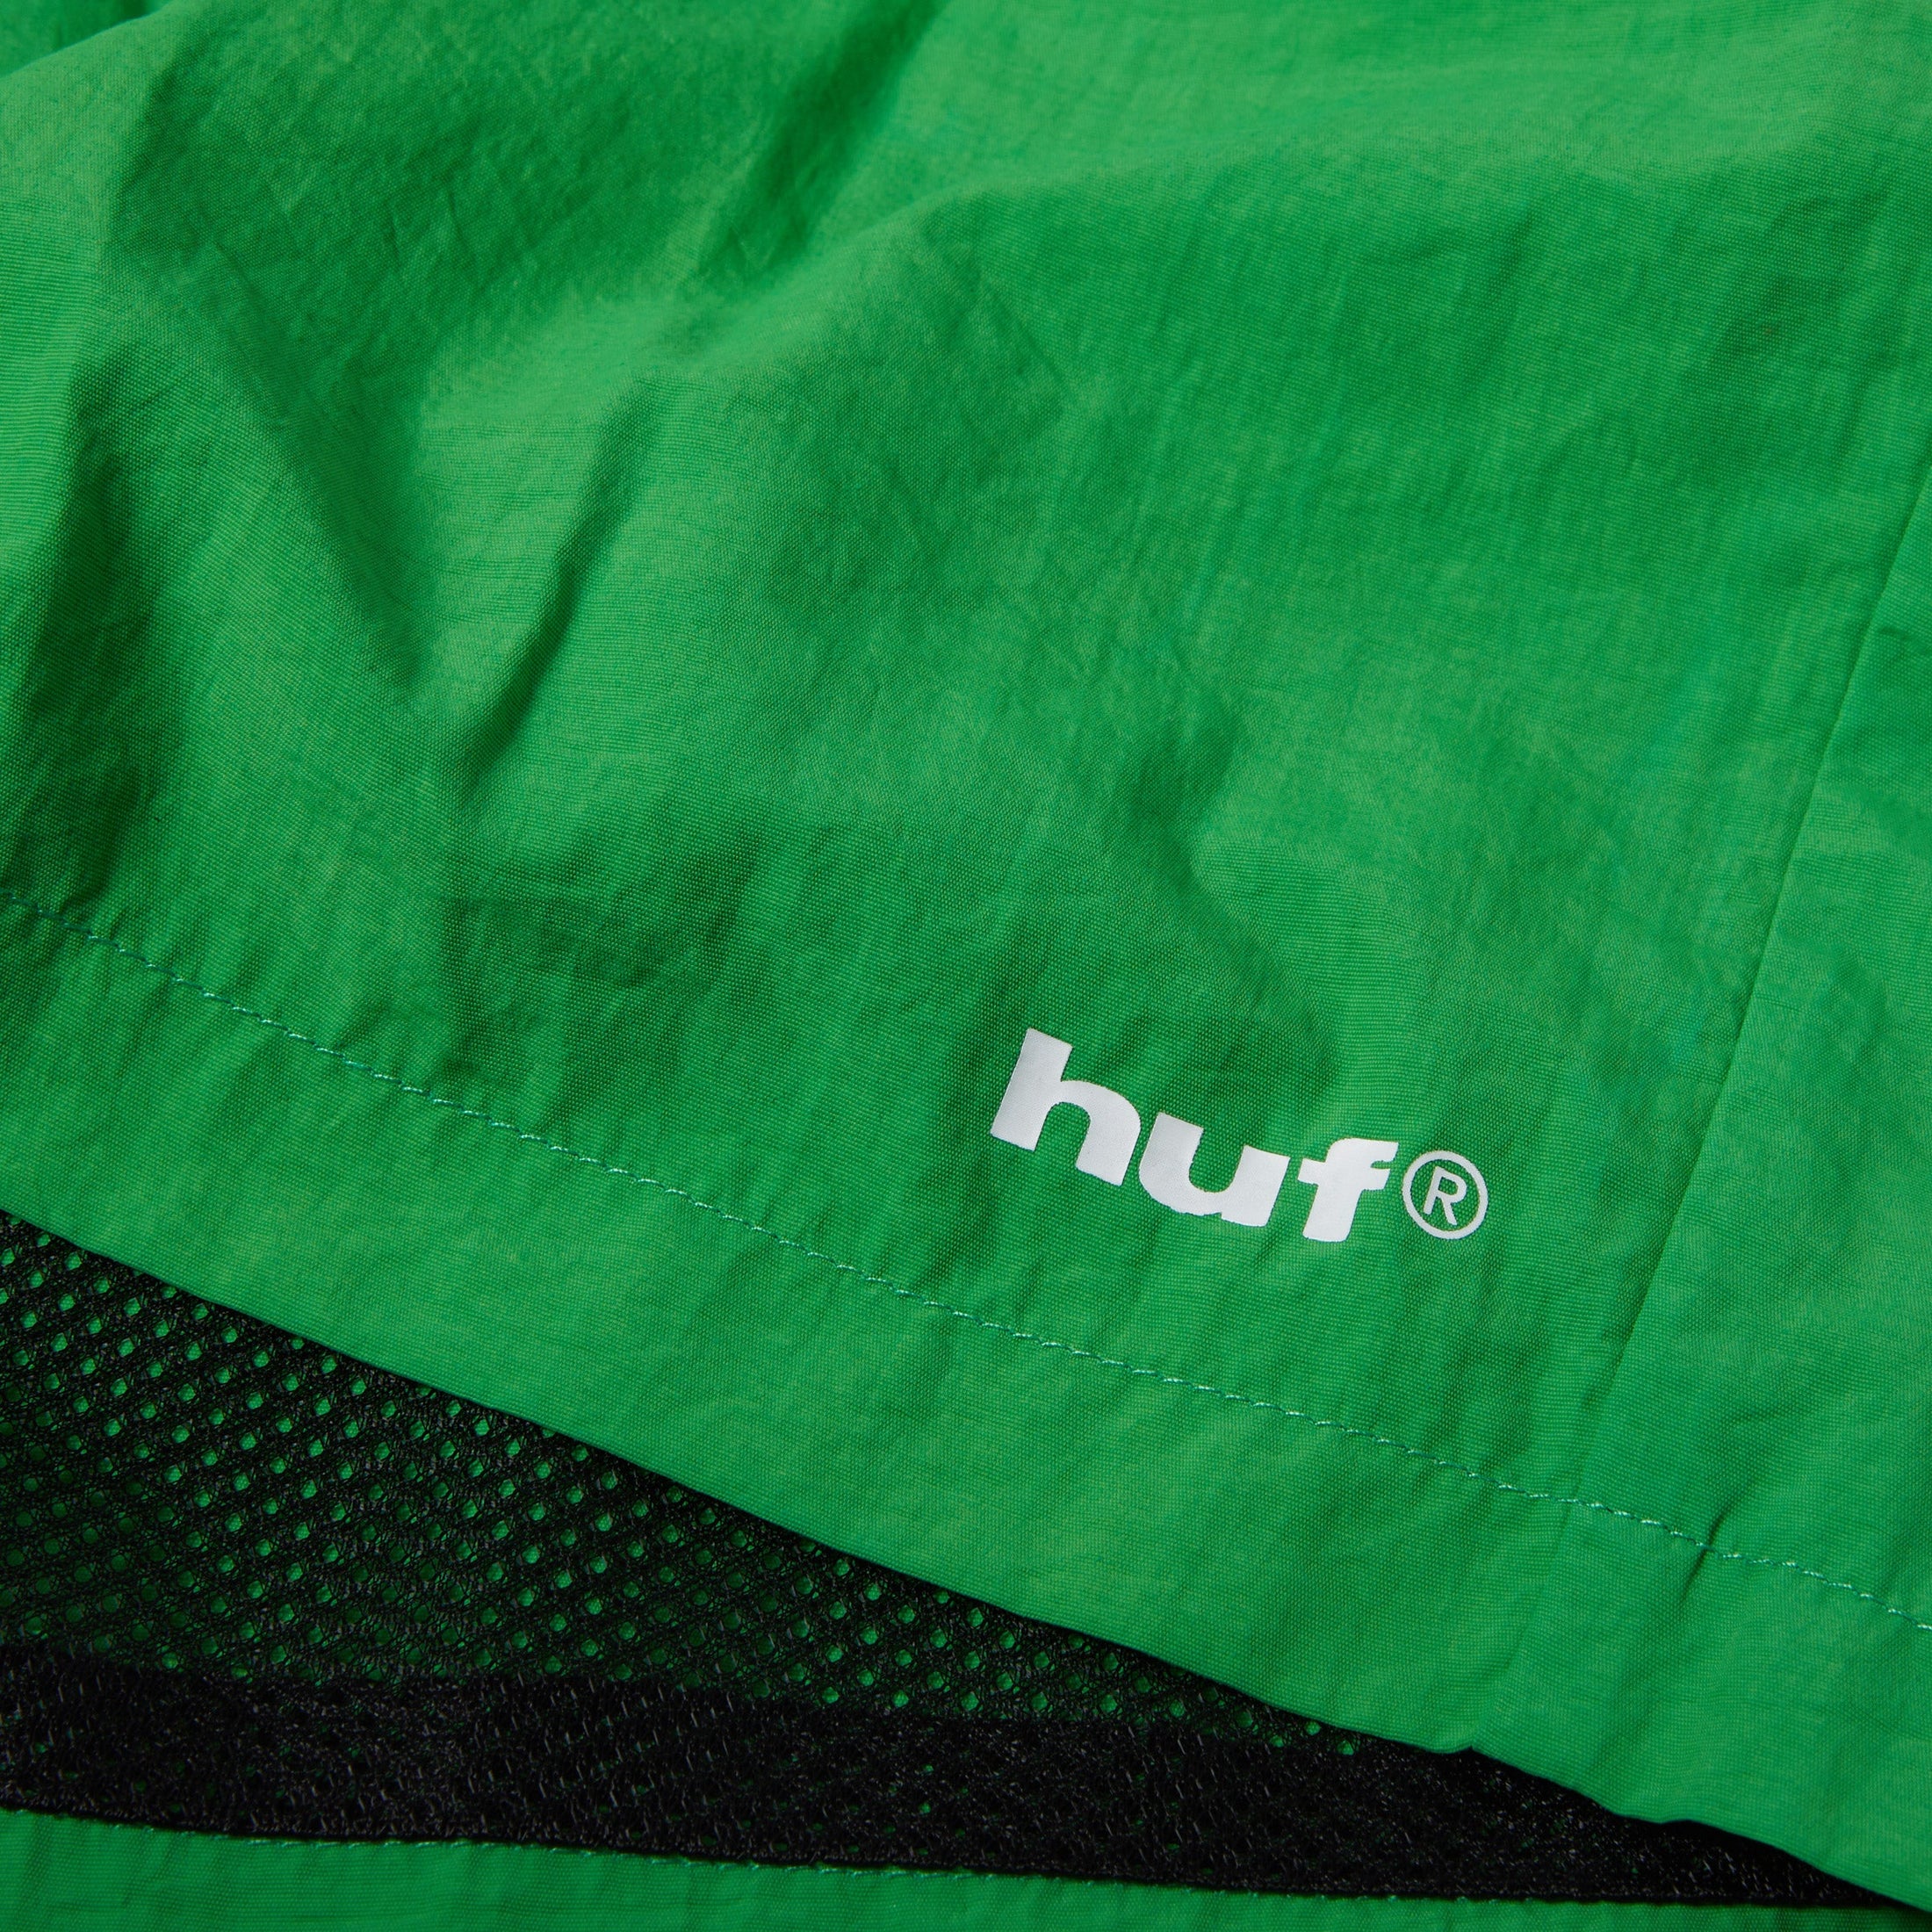 Huf Pacific Easy Shorts Clover